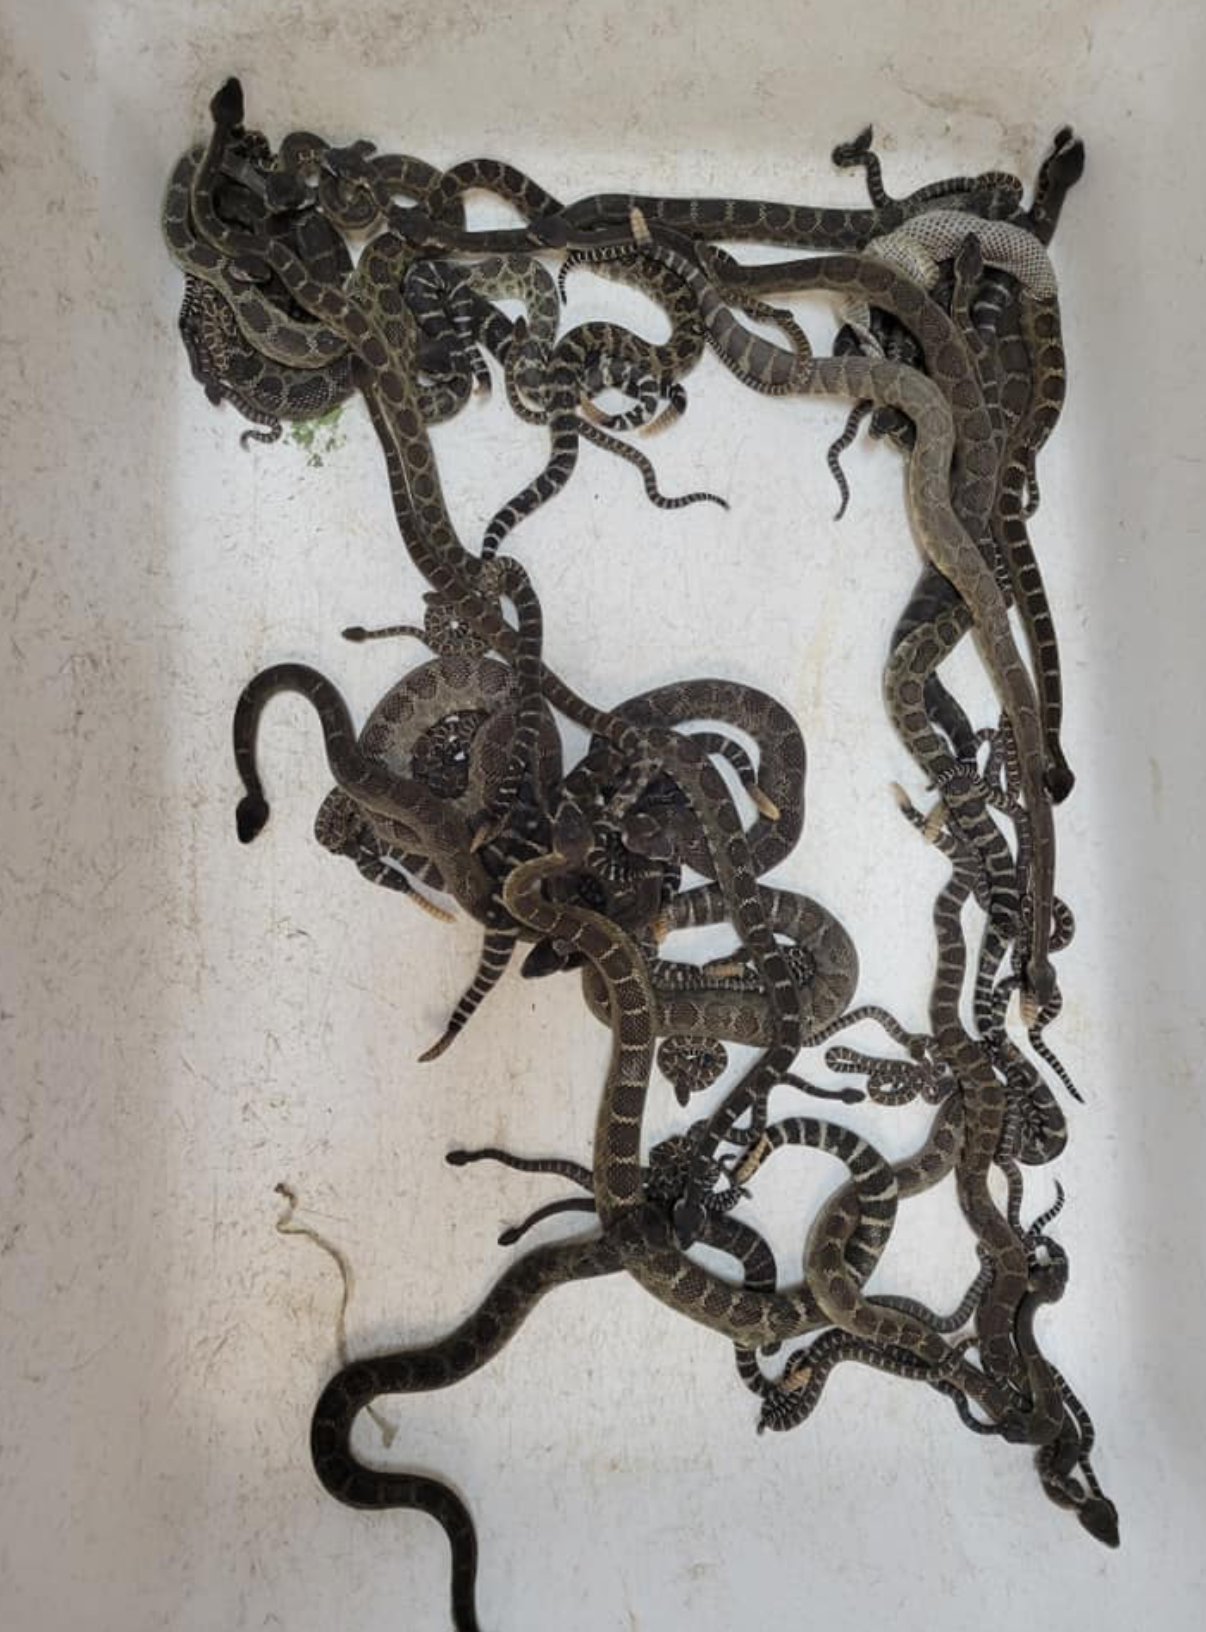 Some of the 90 rattlesnakes pulled out underneath a home in Santa Rosa, California